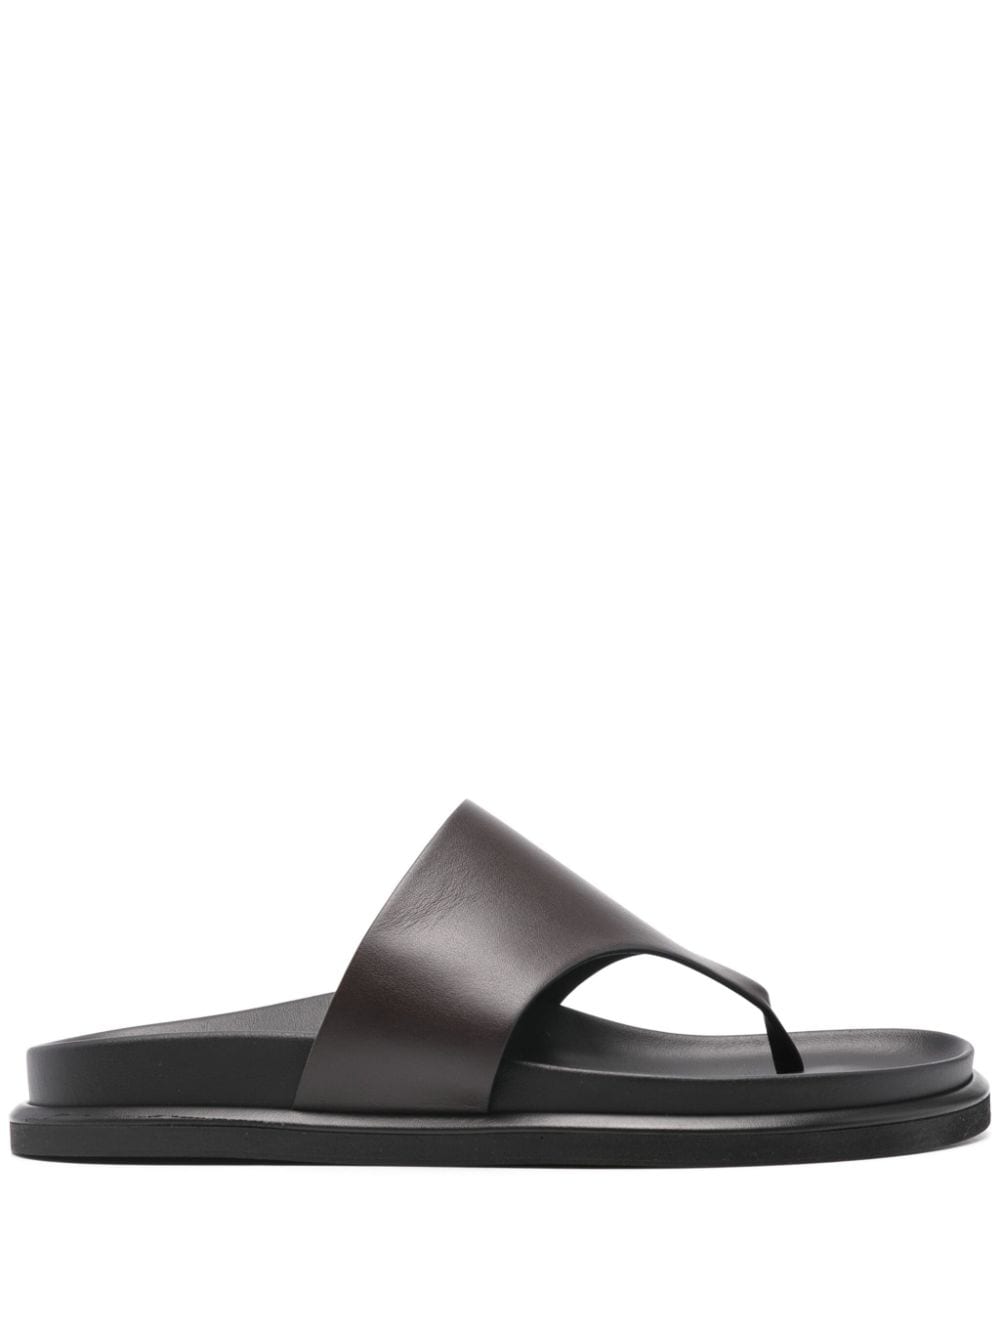 P.A.R.O.S.H. leather slip-on sandals Brown